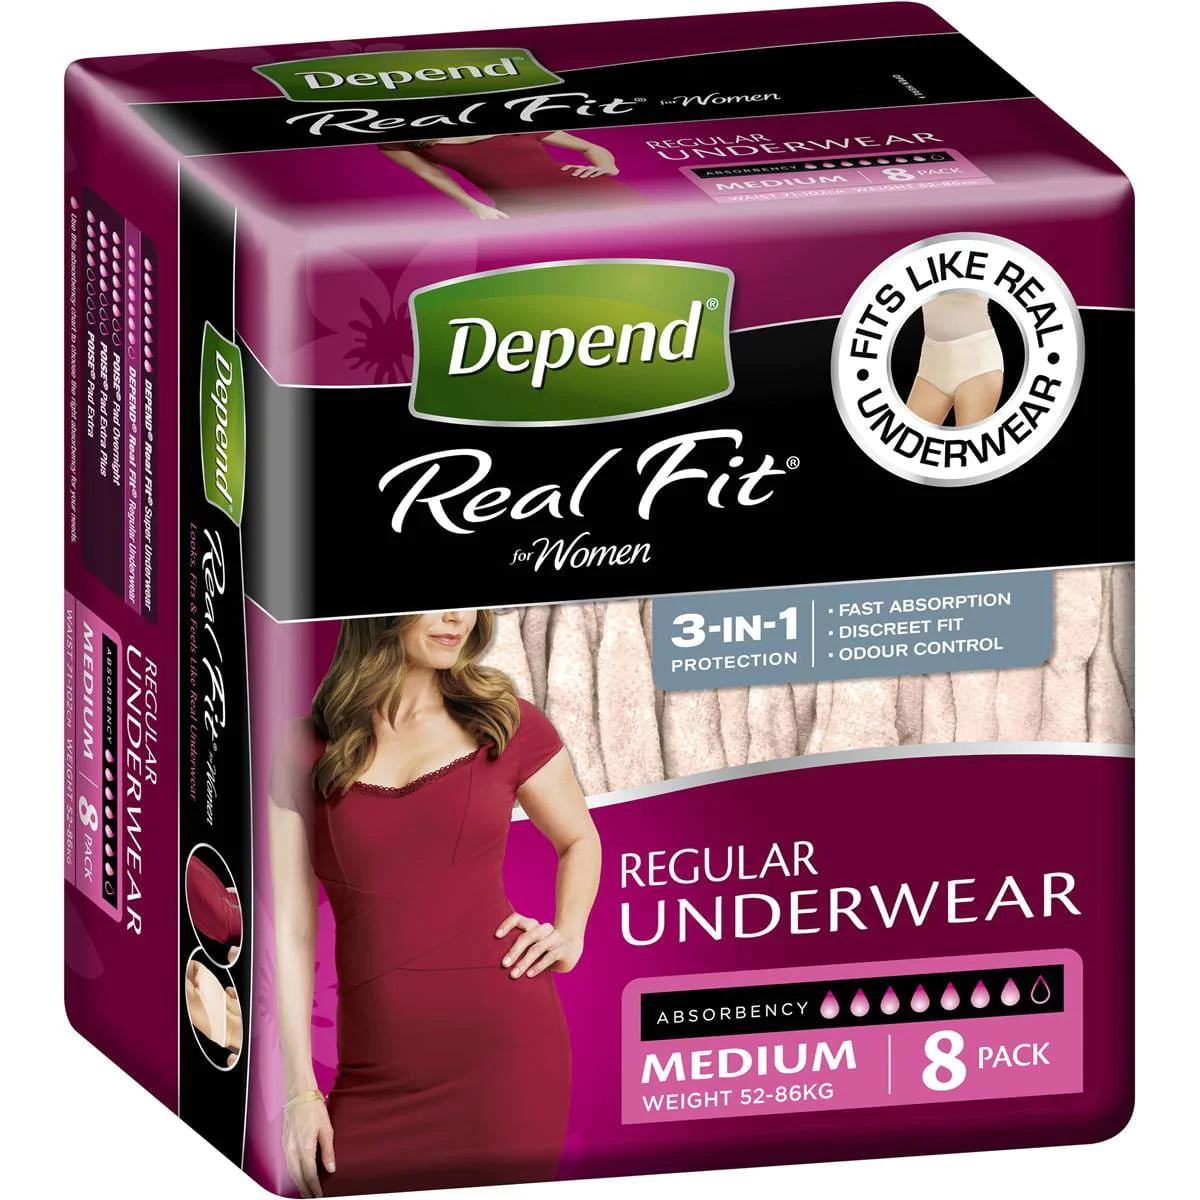 Depend Small/Medium / Carton of 32 Depend Real Fit for Women KIM19635__CT